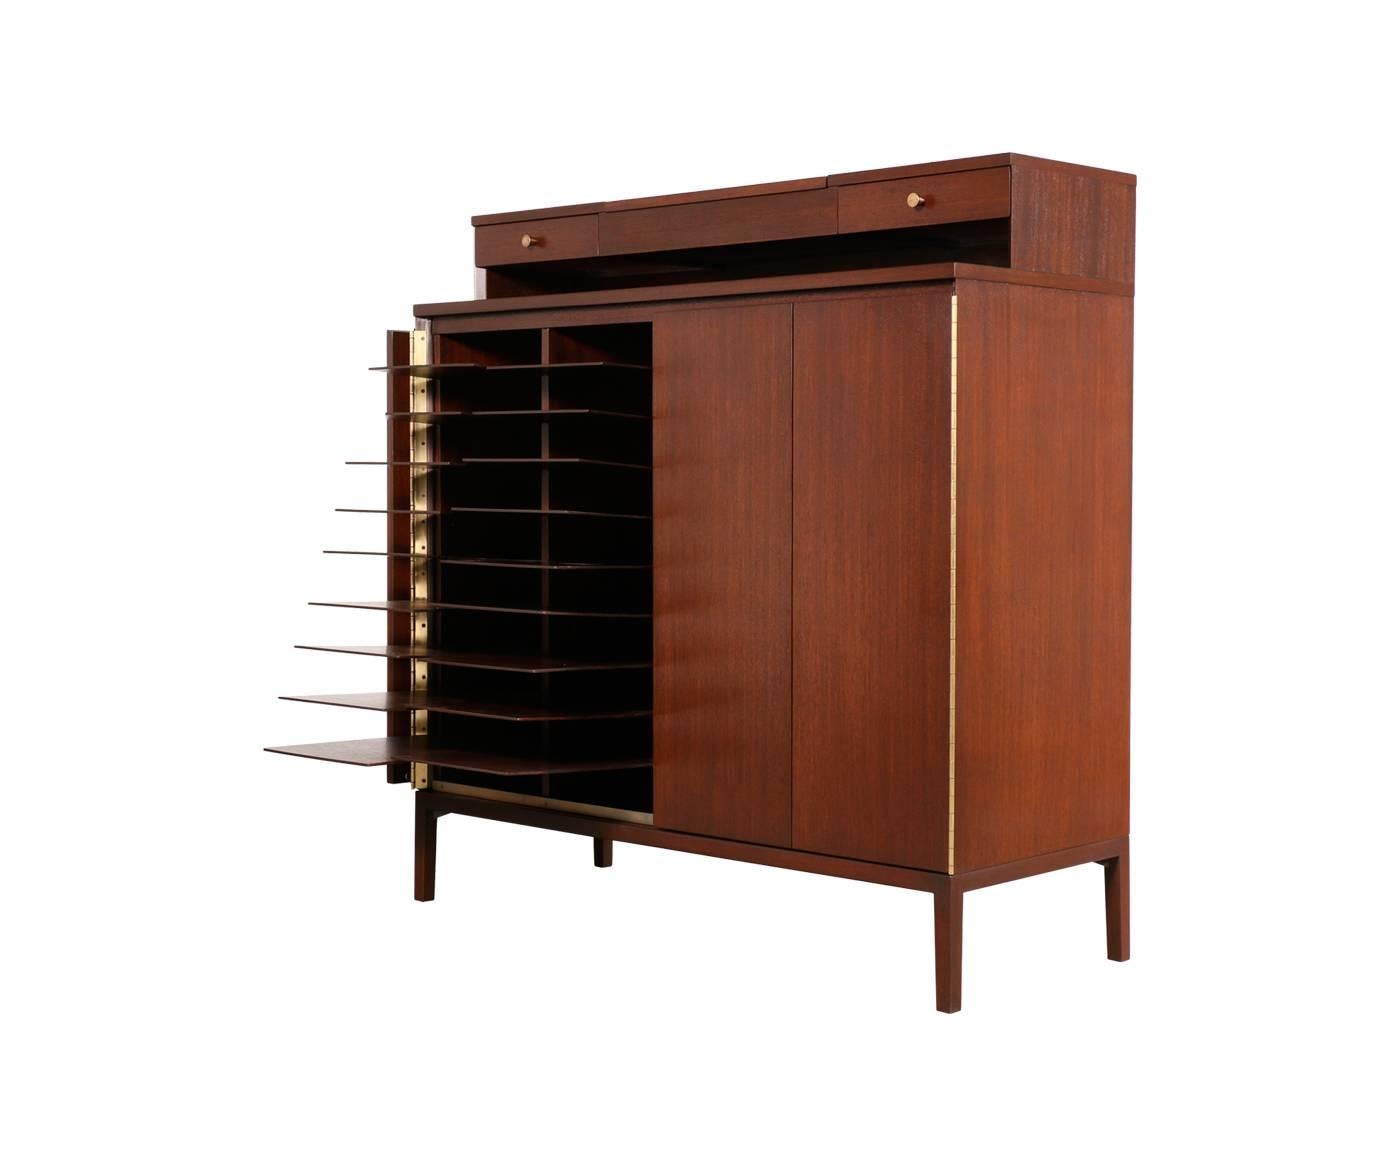 American Paul McCobb “Irwin Collection” Bachelors Chest with Bi-Folding Doors for Calvin